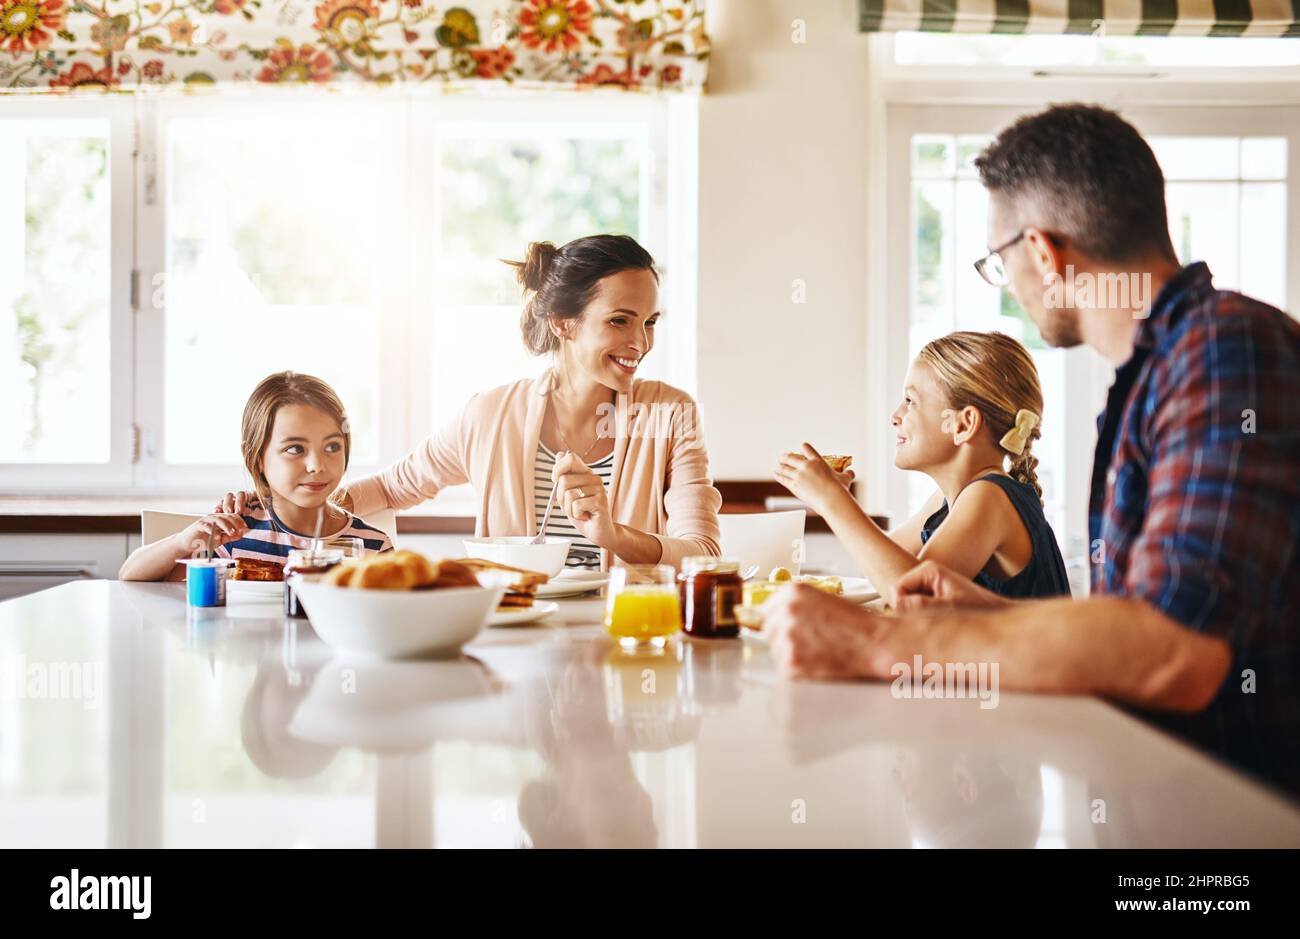 Sharing stories at the breakfast table. Cropped shot of a family enjoying breakfast together. Stock Photo